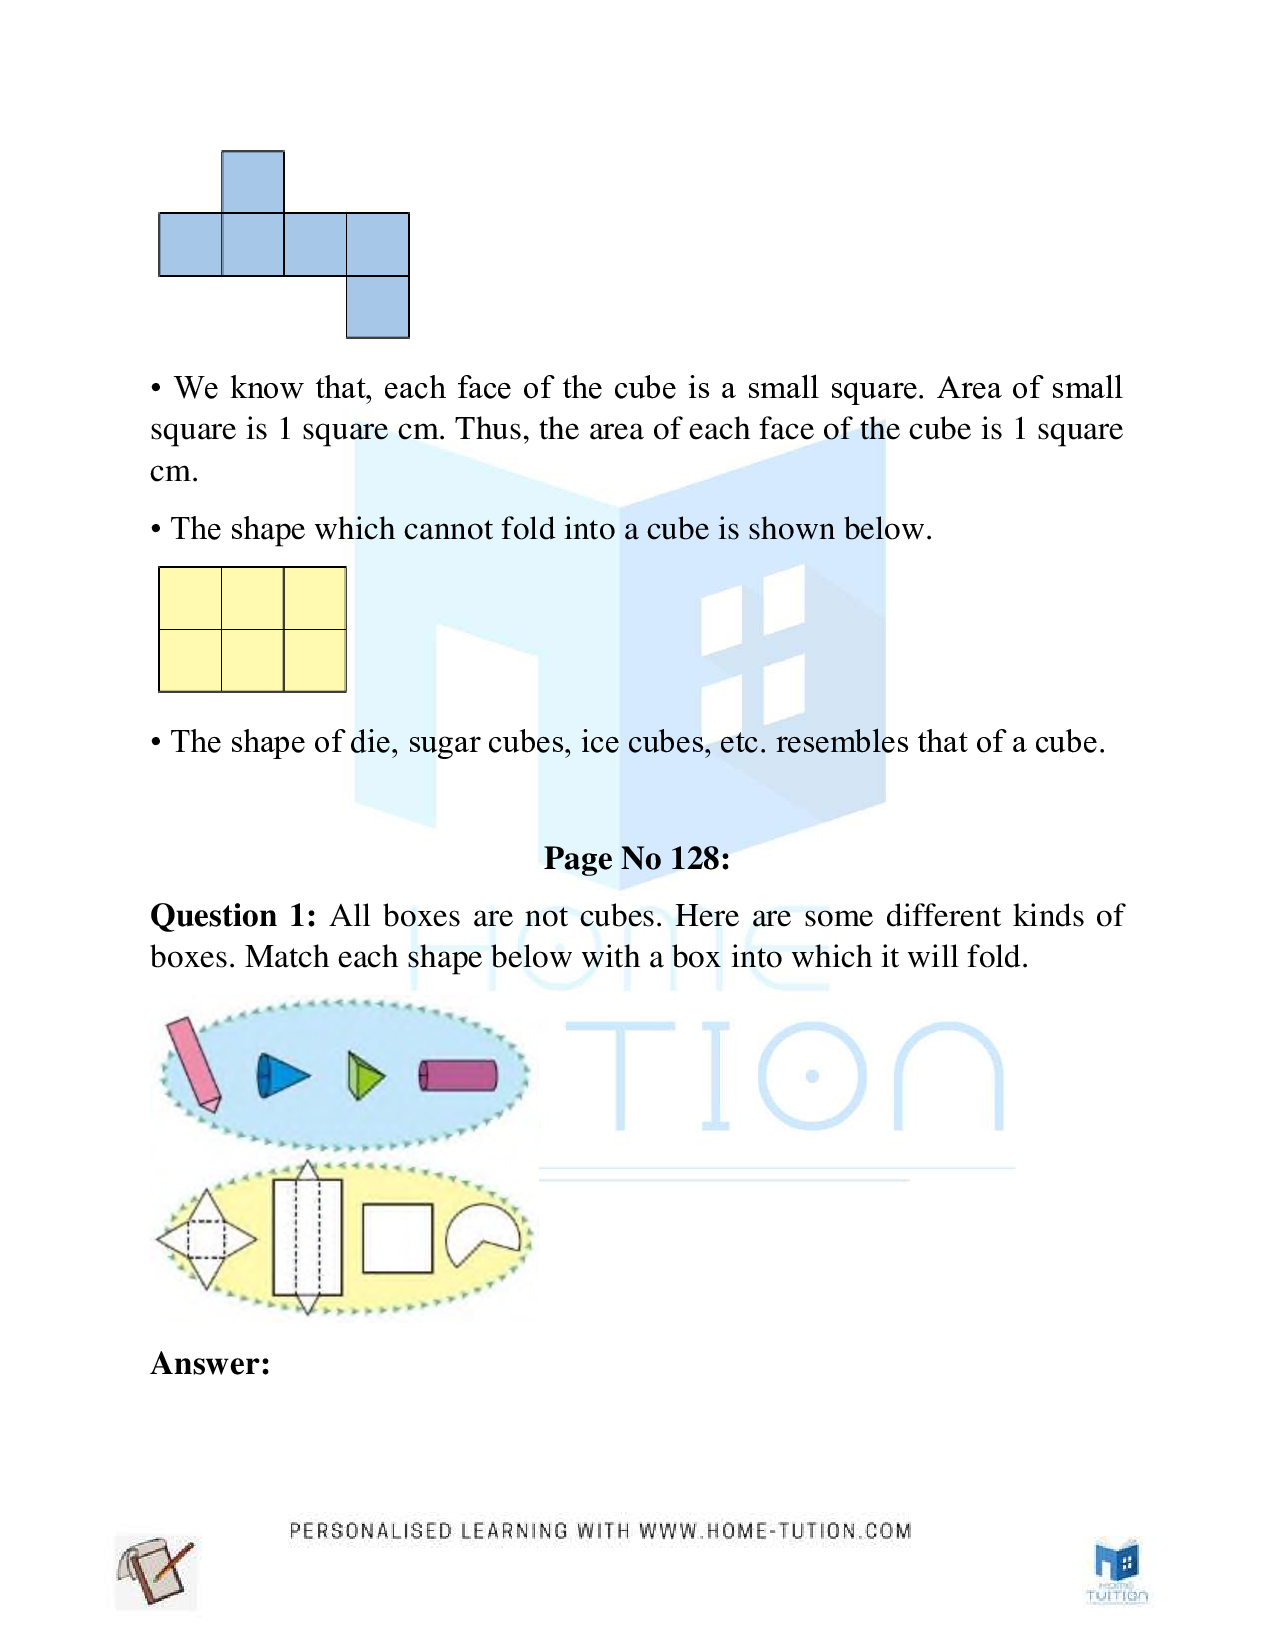 NCERT Class 5 Maths Chapter 9 Boxes And Sketches